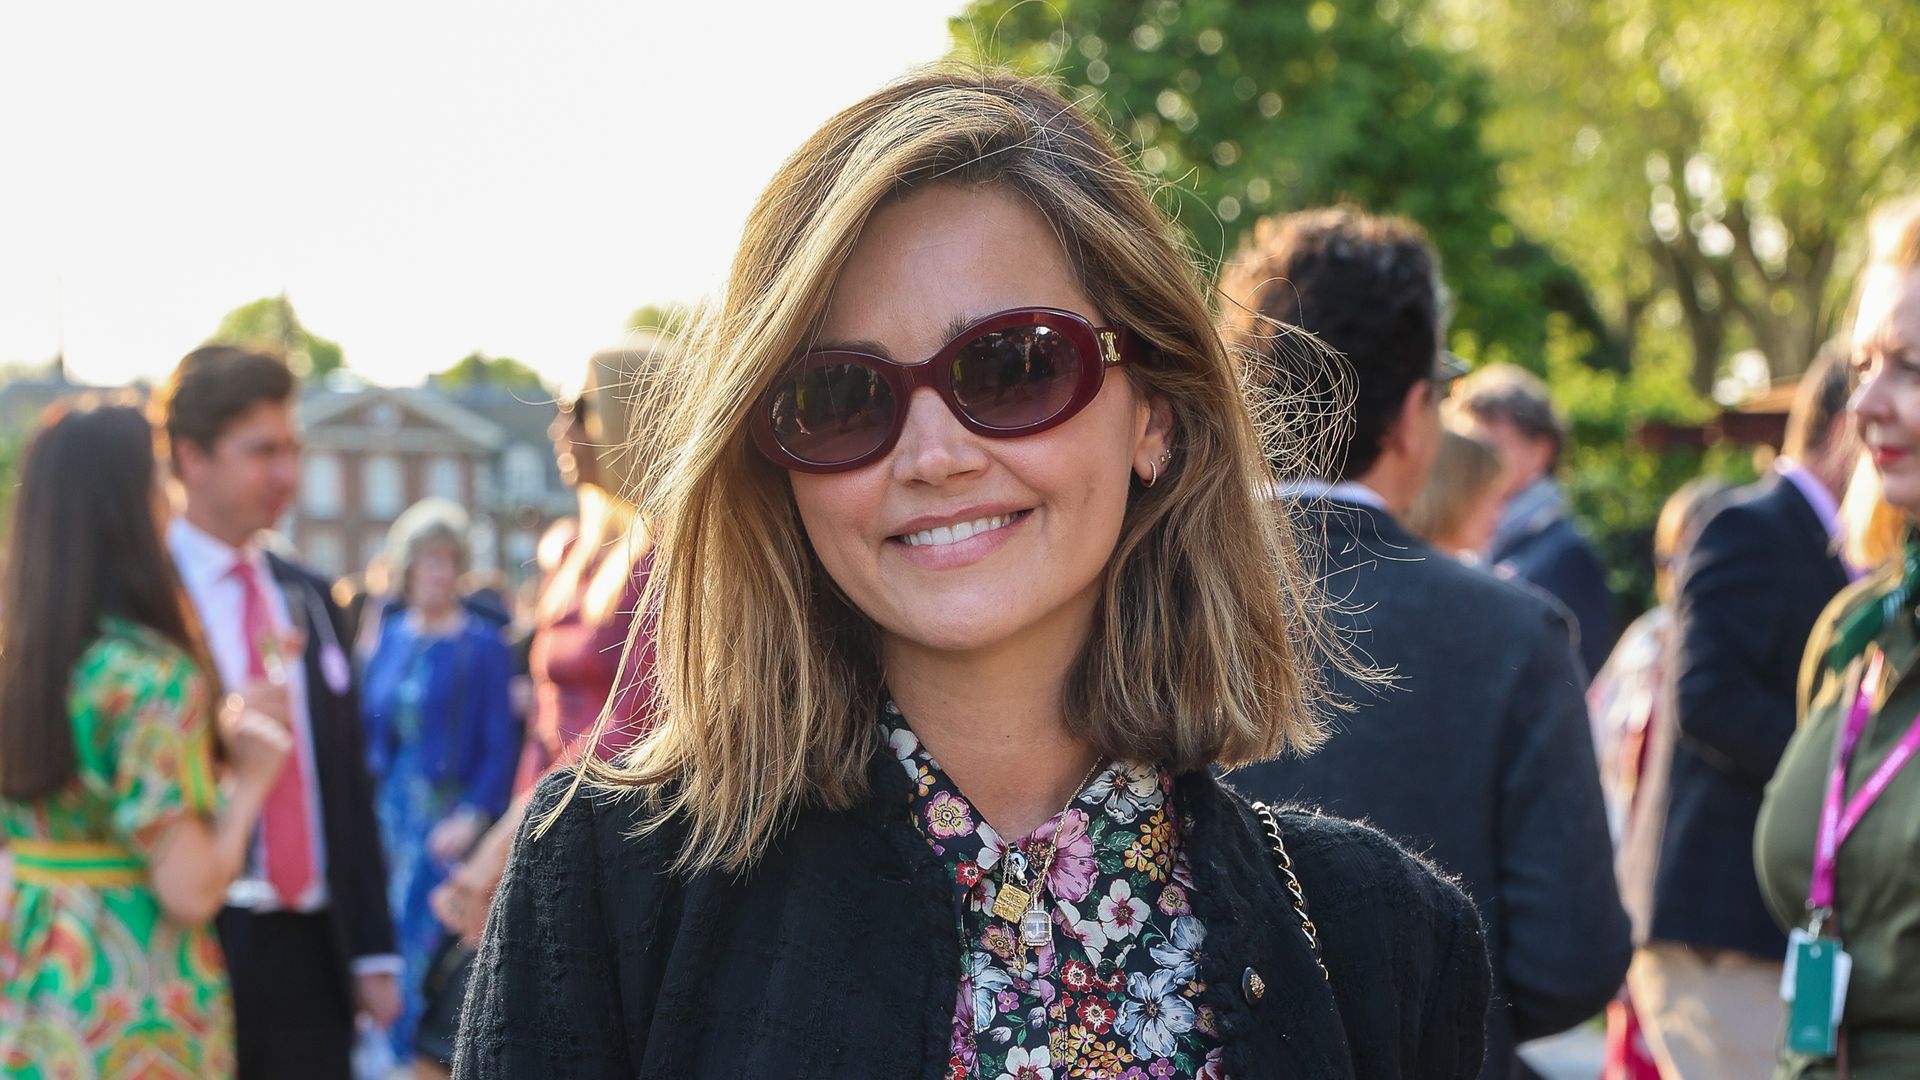 Jenna Coleman finished off her outfit with classic designer accessories 